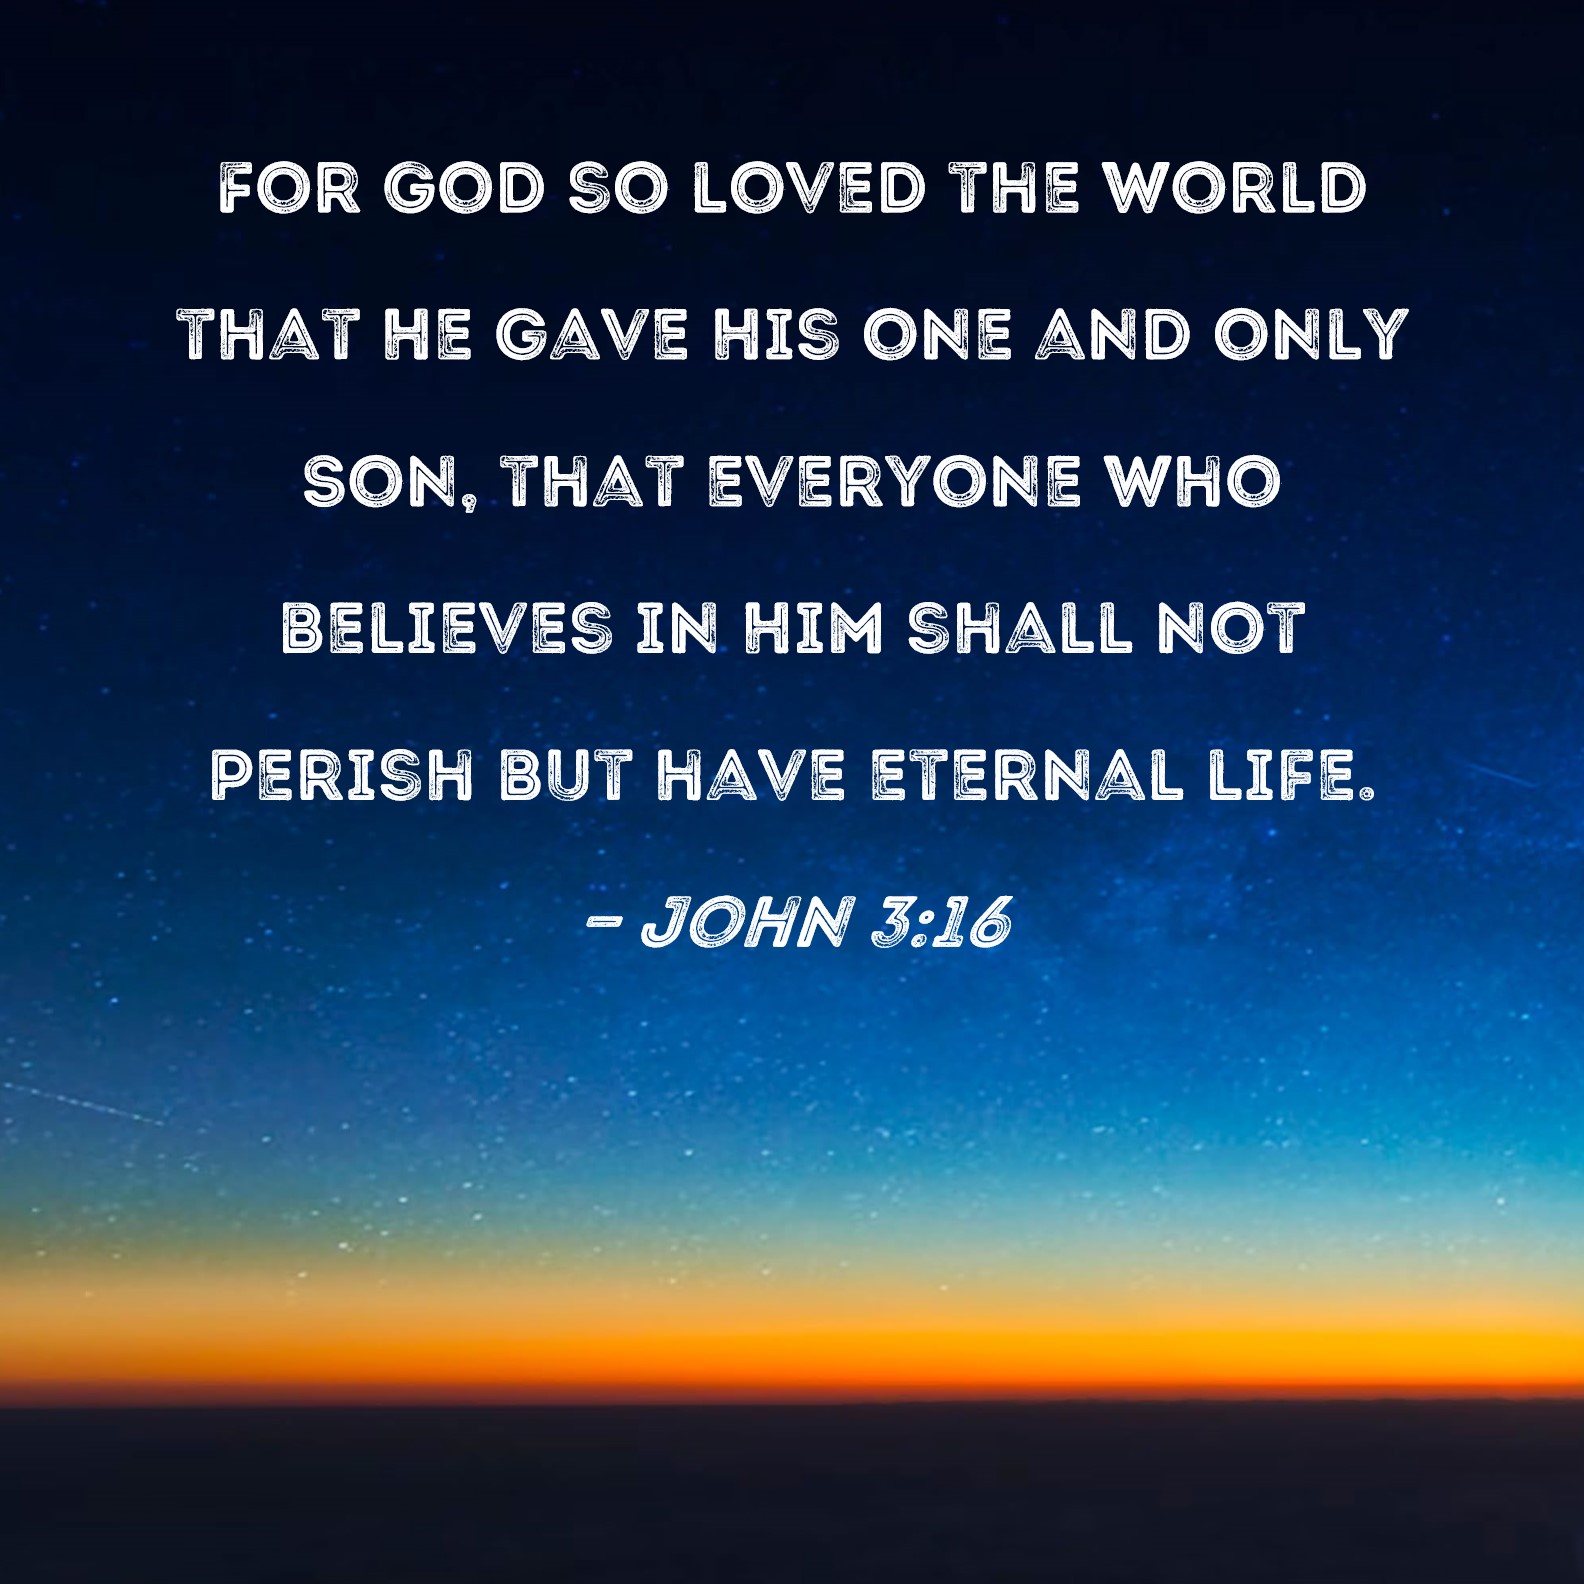 john-3-16-for-god-so-loved-the-world-footprints-in-the-sand